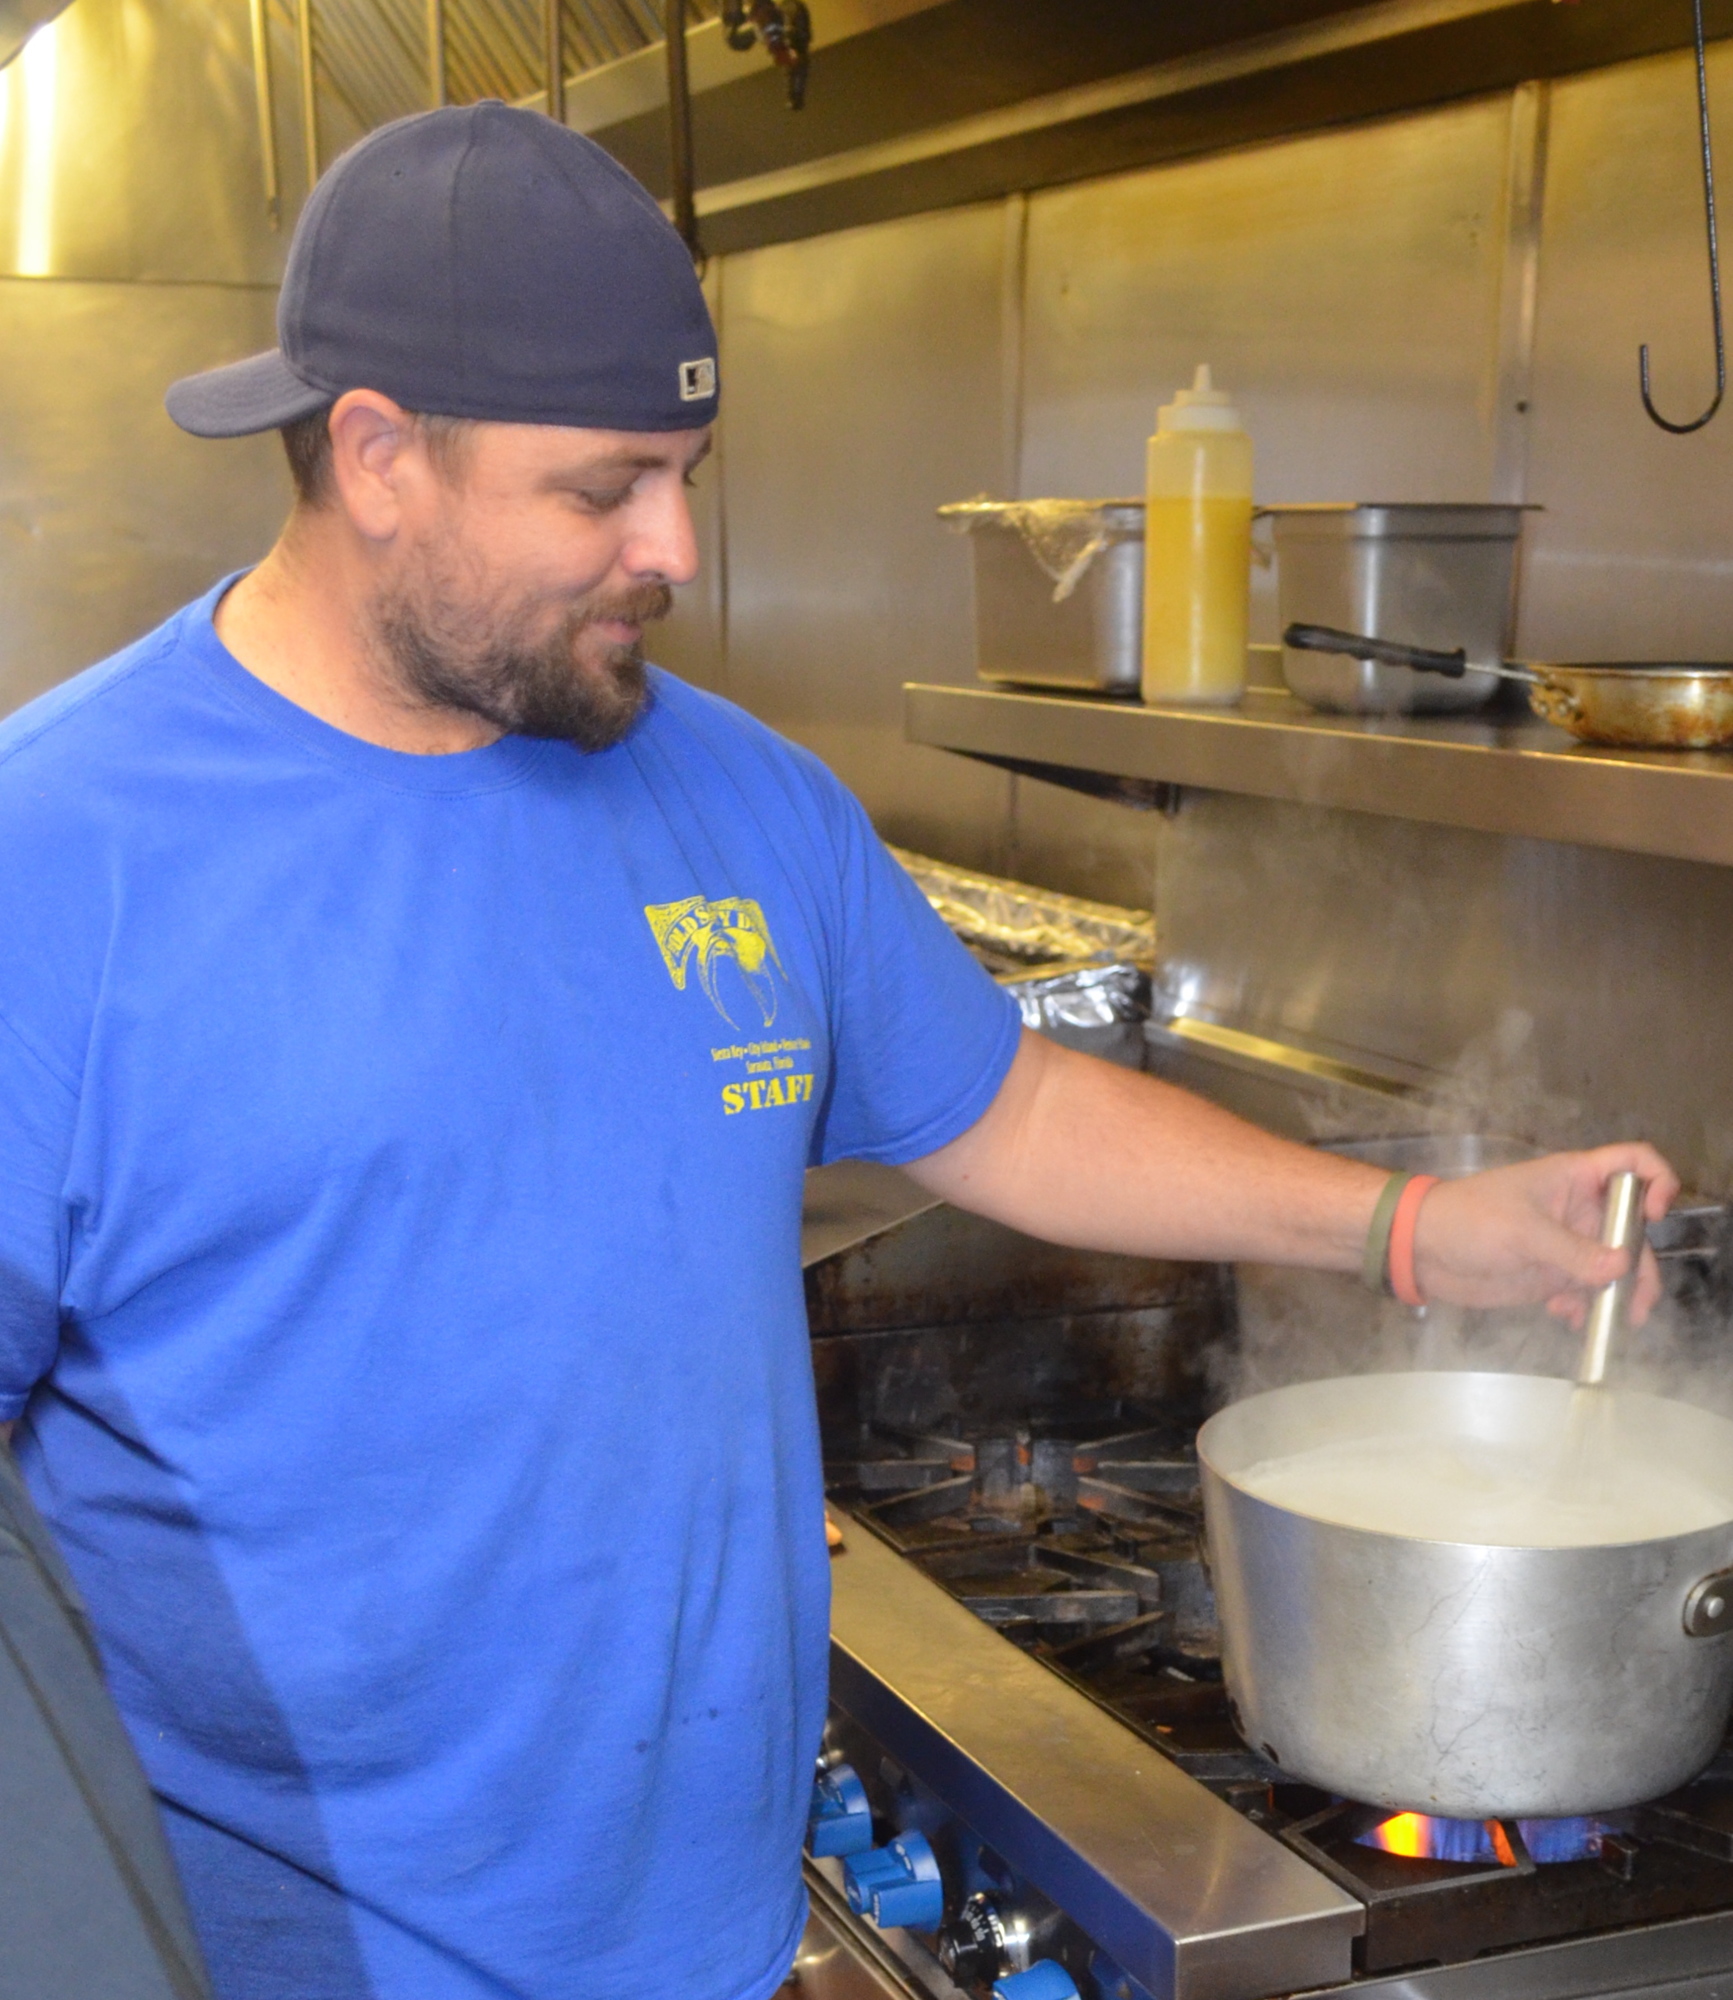 Manager Josh Shear, an 18-year veteran from Lakewood Ranch, starts the grits for breakfast at The Old Salty Dog. Terry O'Connor